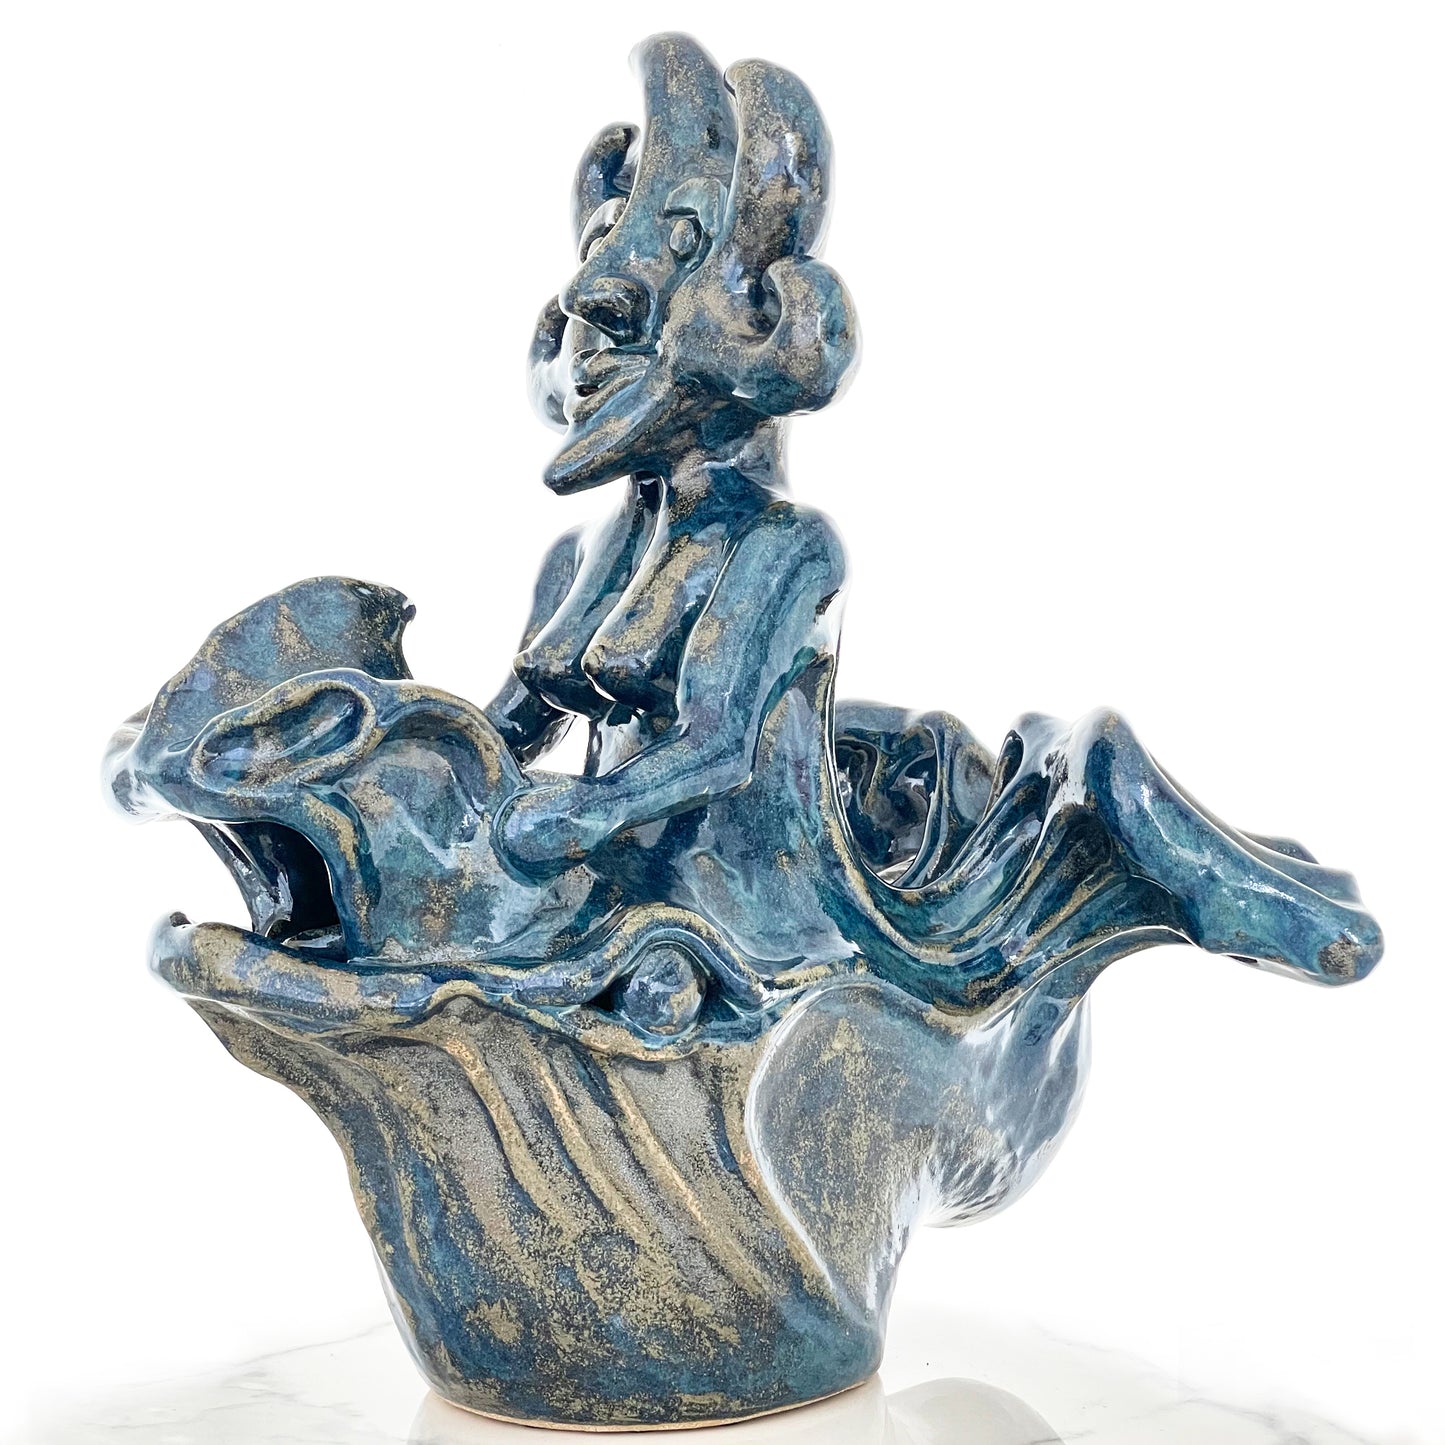 The Mother of the Sea - SCULPTURE - Edition of 1